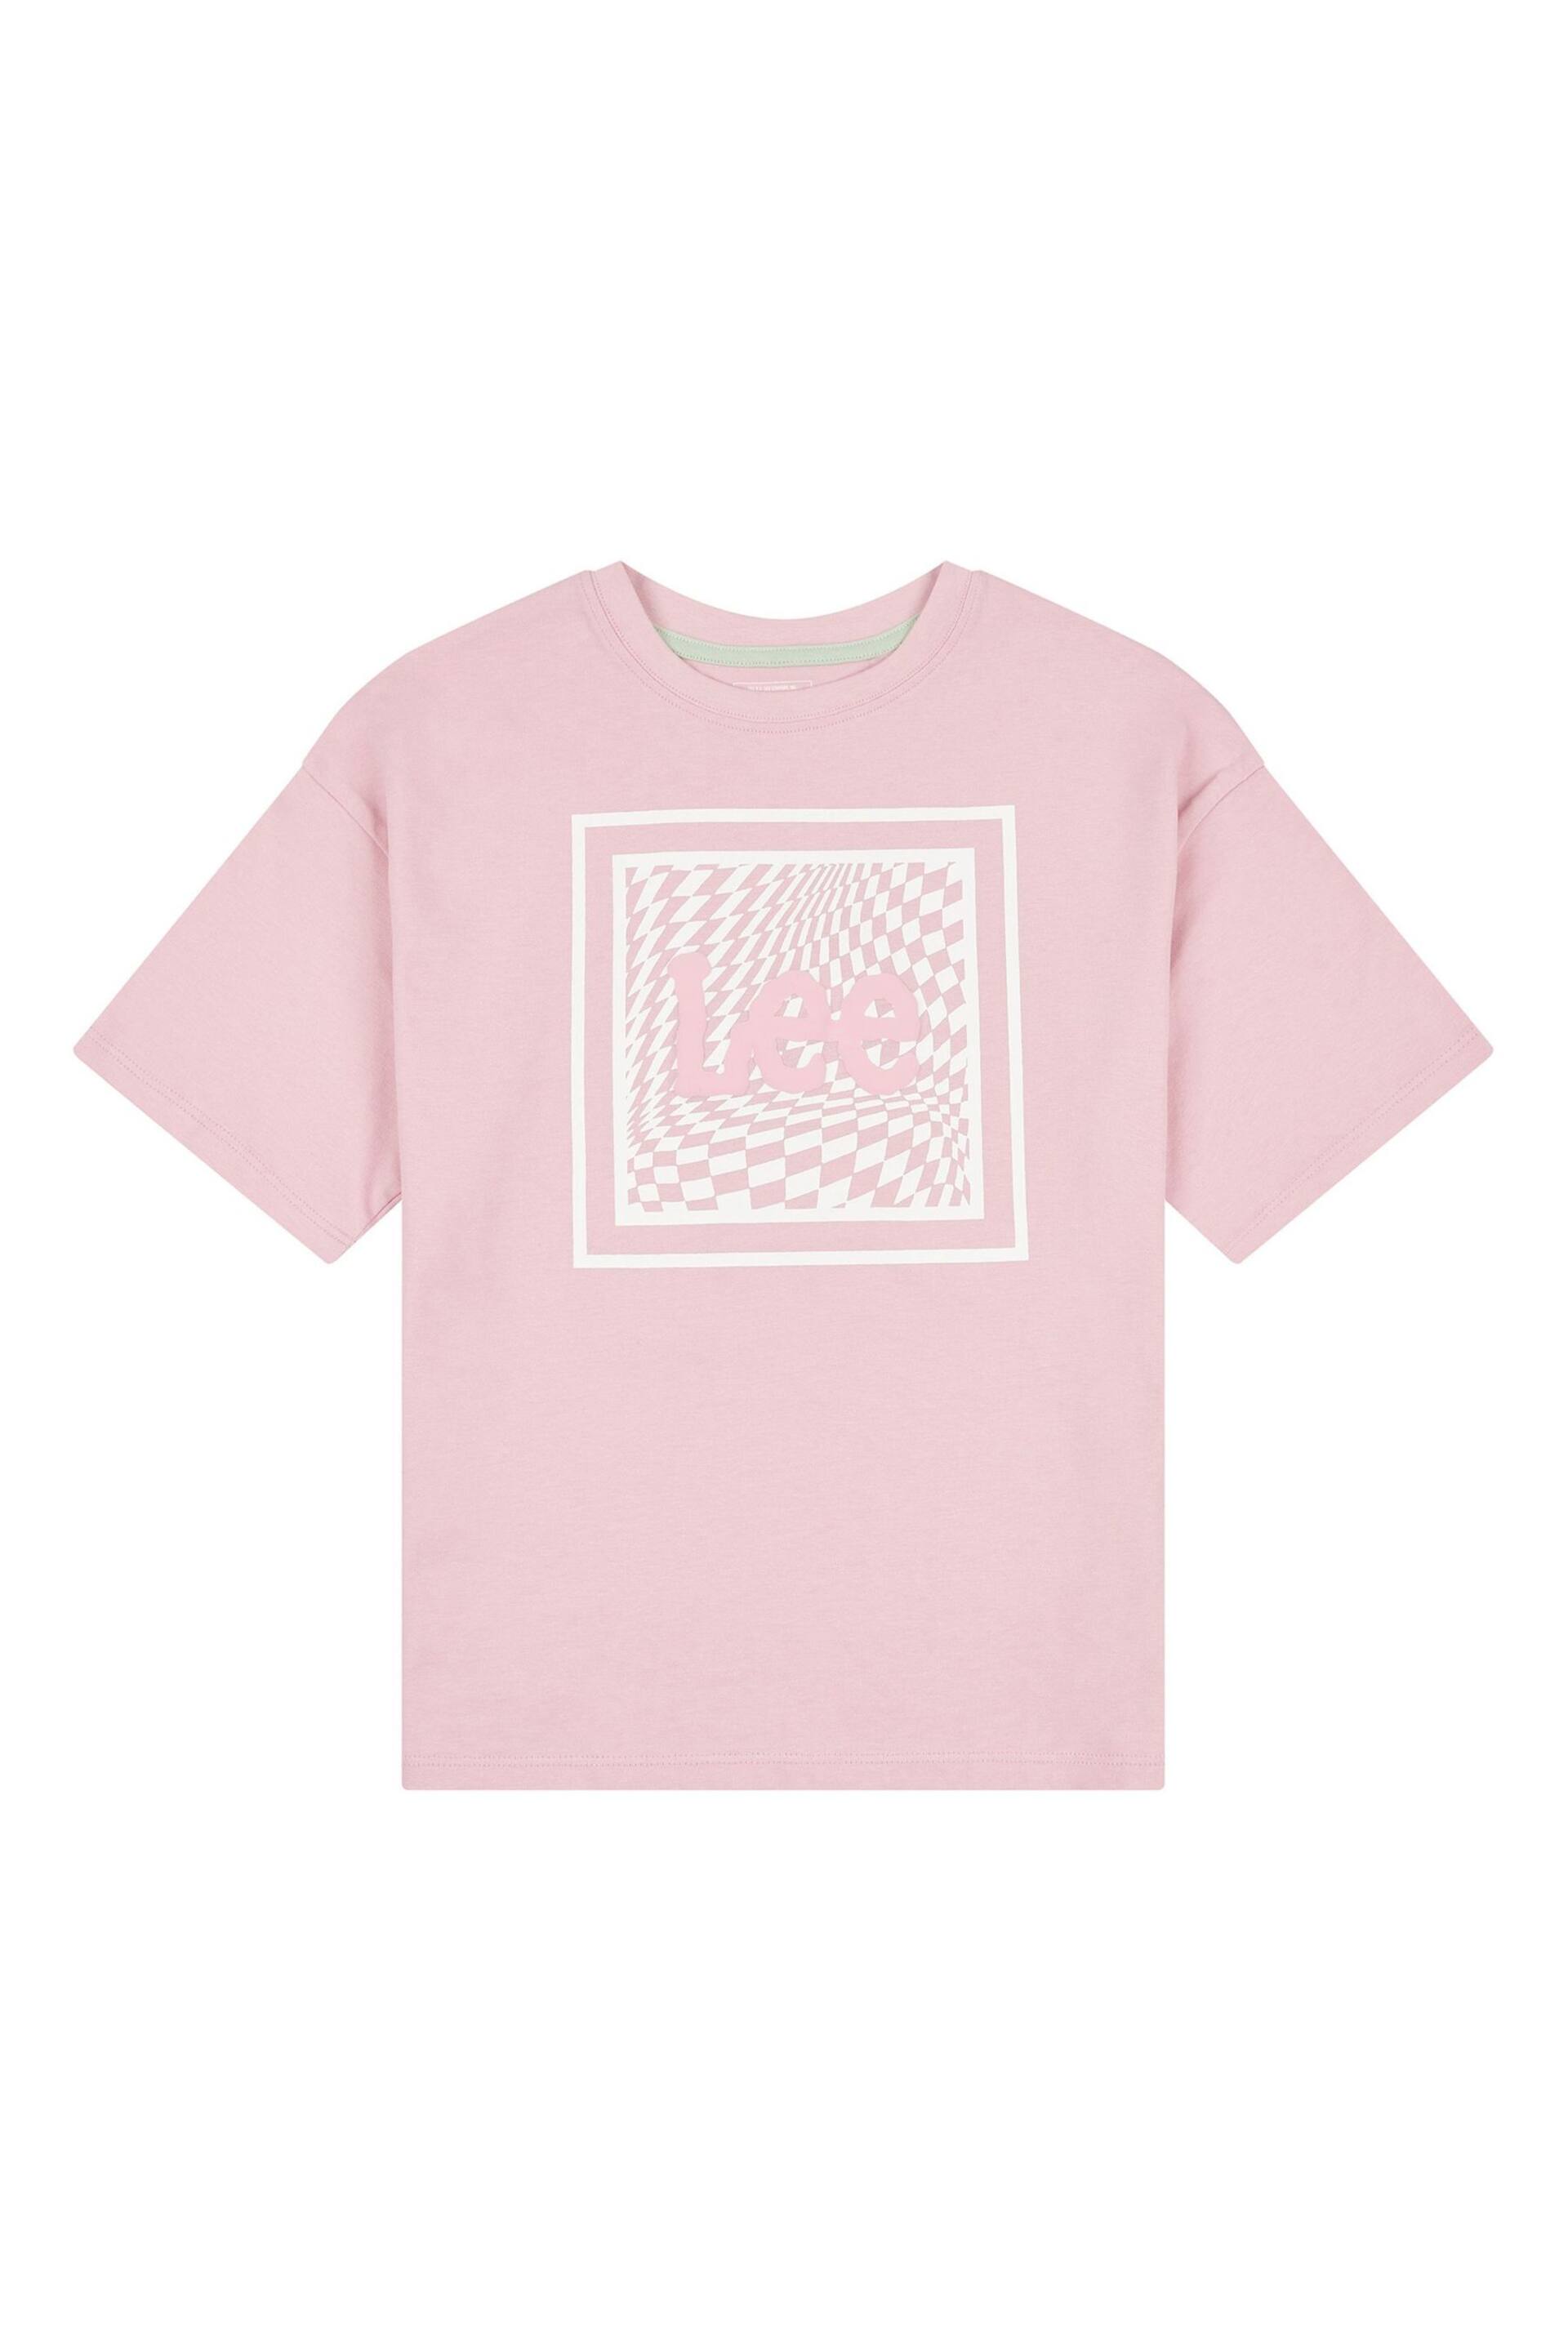 Lee Girls Pink Check Graphic Boxy Fit T-Shirt - Image 7 of 9